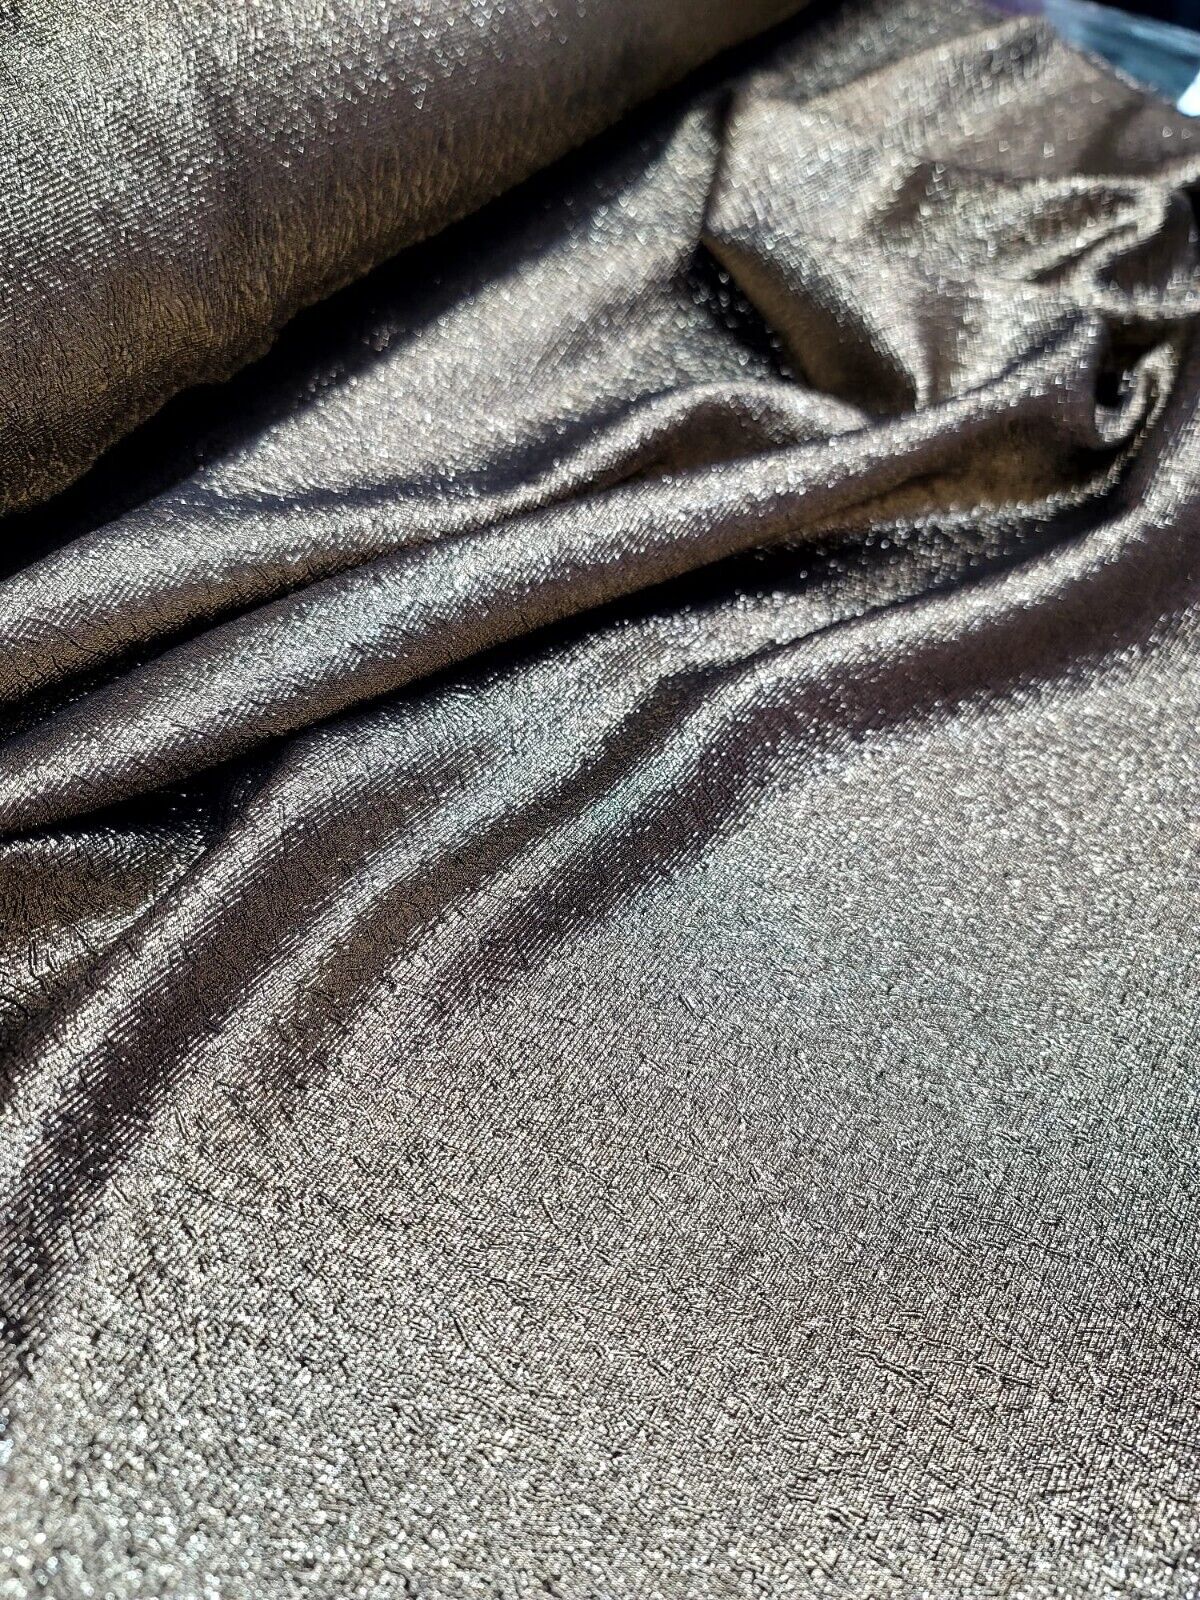 GOLD Metallic Brocade Jacquard Fabric Sold BY THE YARD TEXTURED EMBOSSED FOR DRE